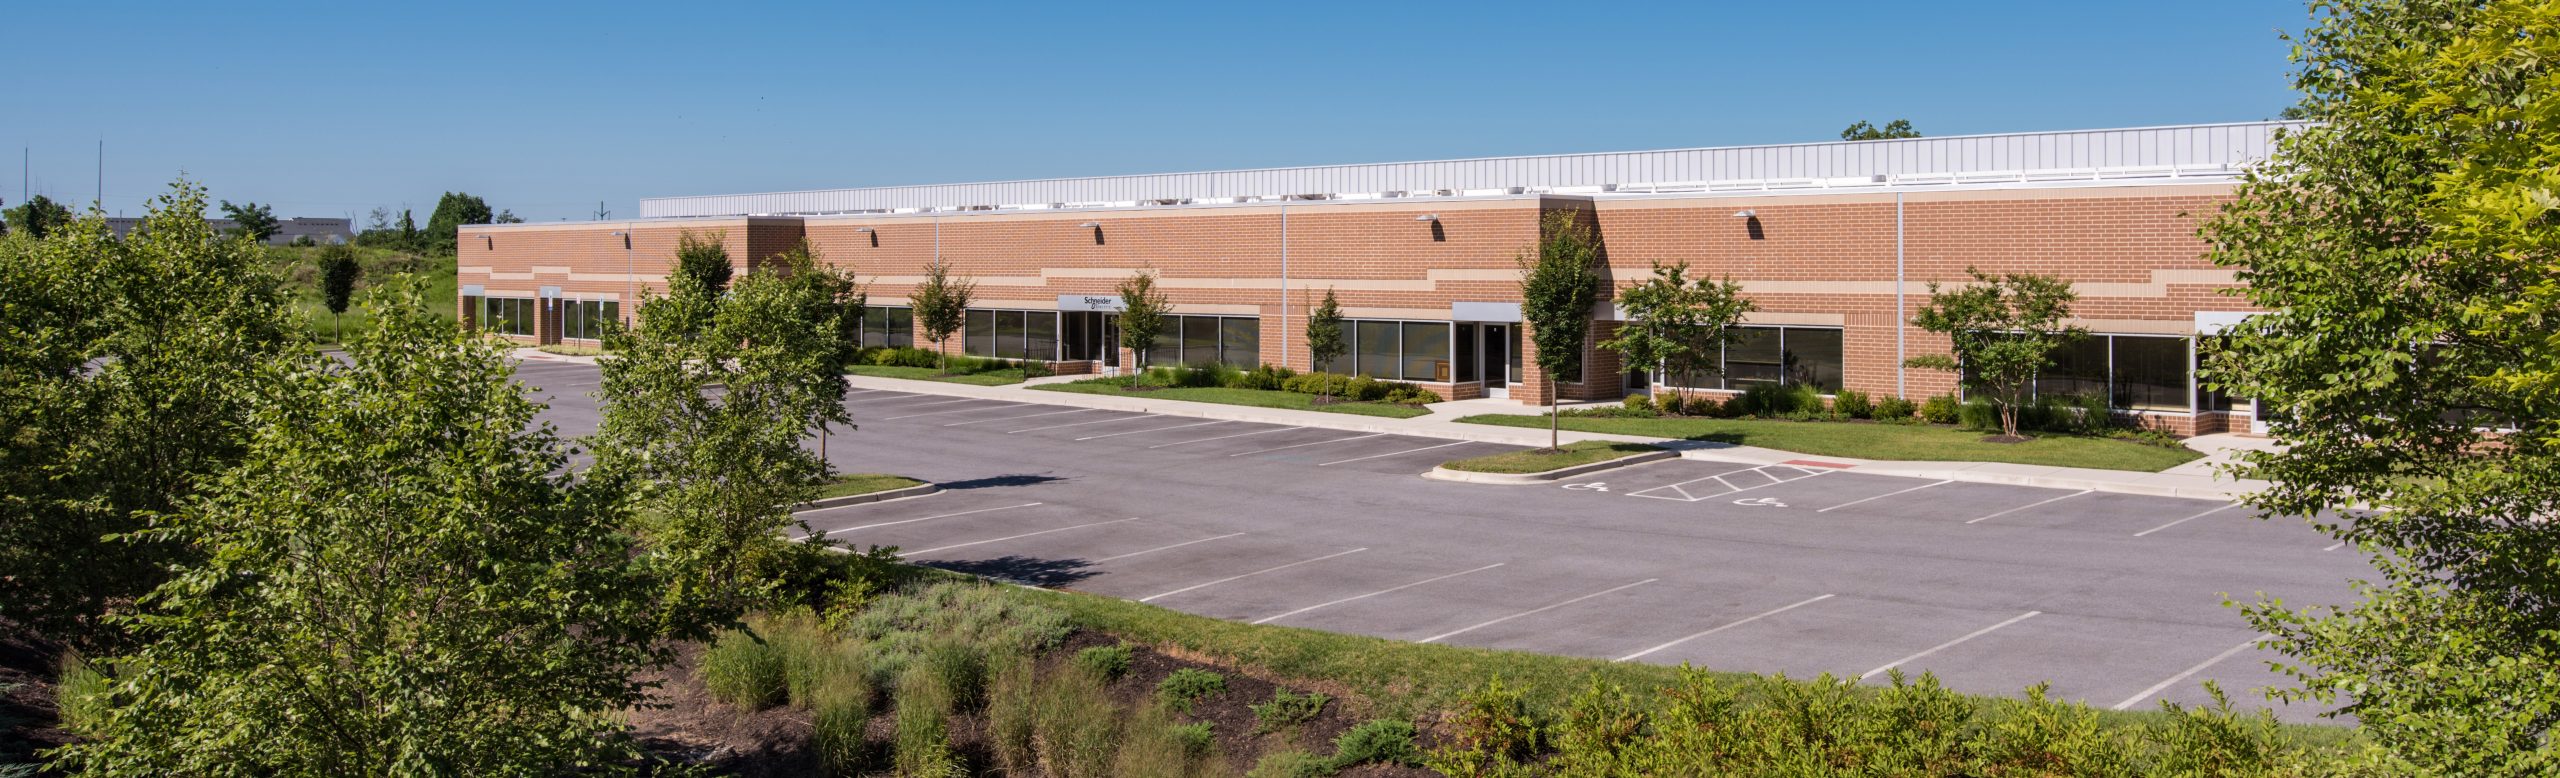 Flex/R&D building at Dolfield Business Park in Owings Mills, MD